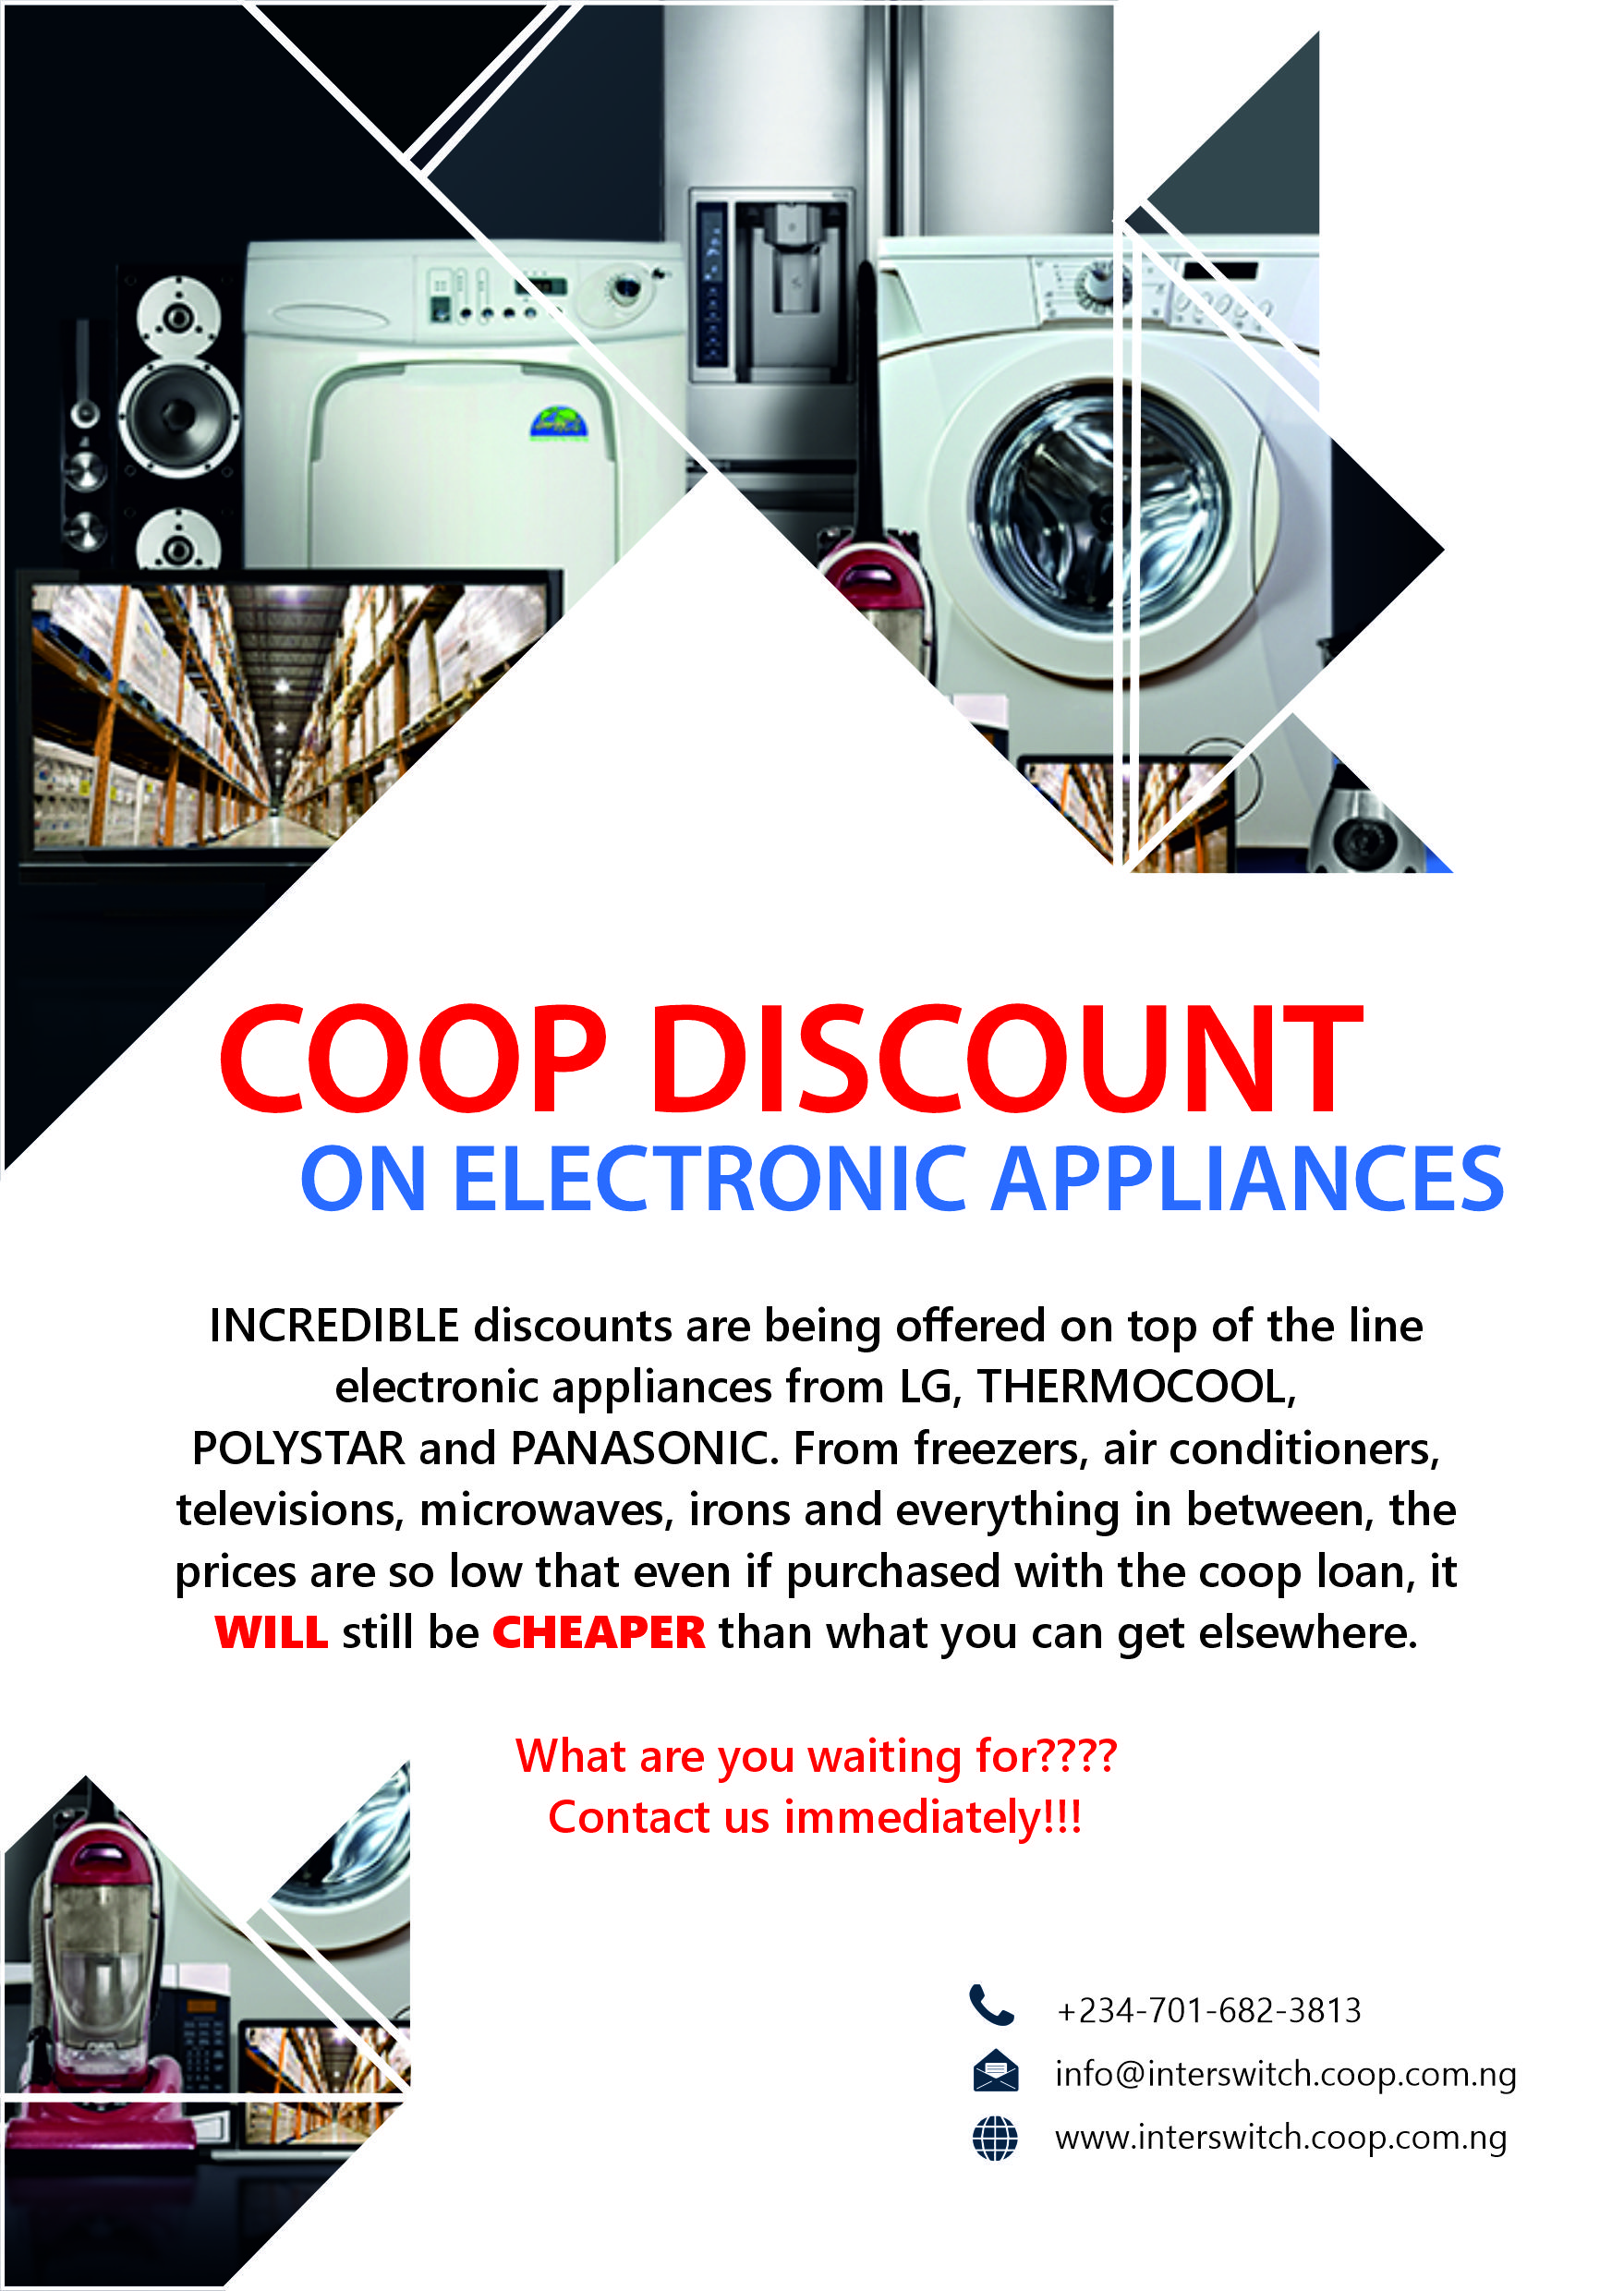 Coop Discount on Electronic Appliances